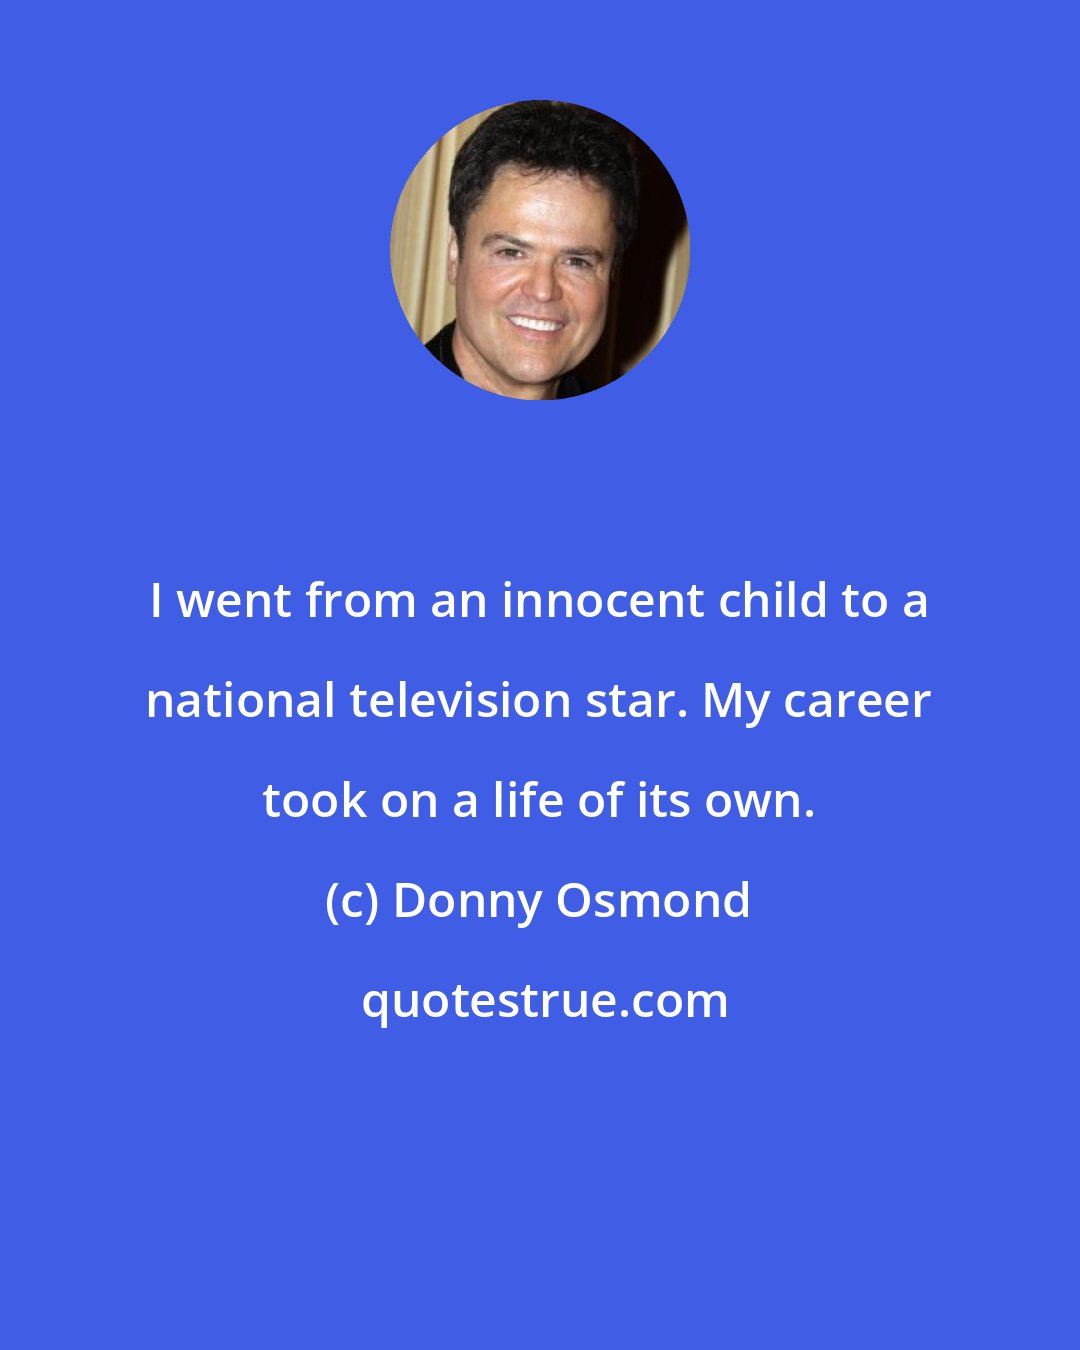 Donny Osmond: I went from an innocent child to a national television star. My career took on a life of its own.